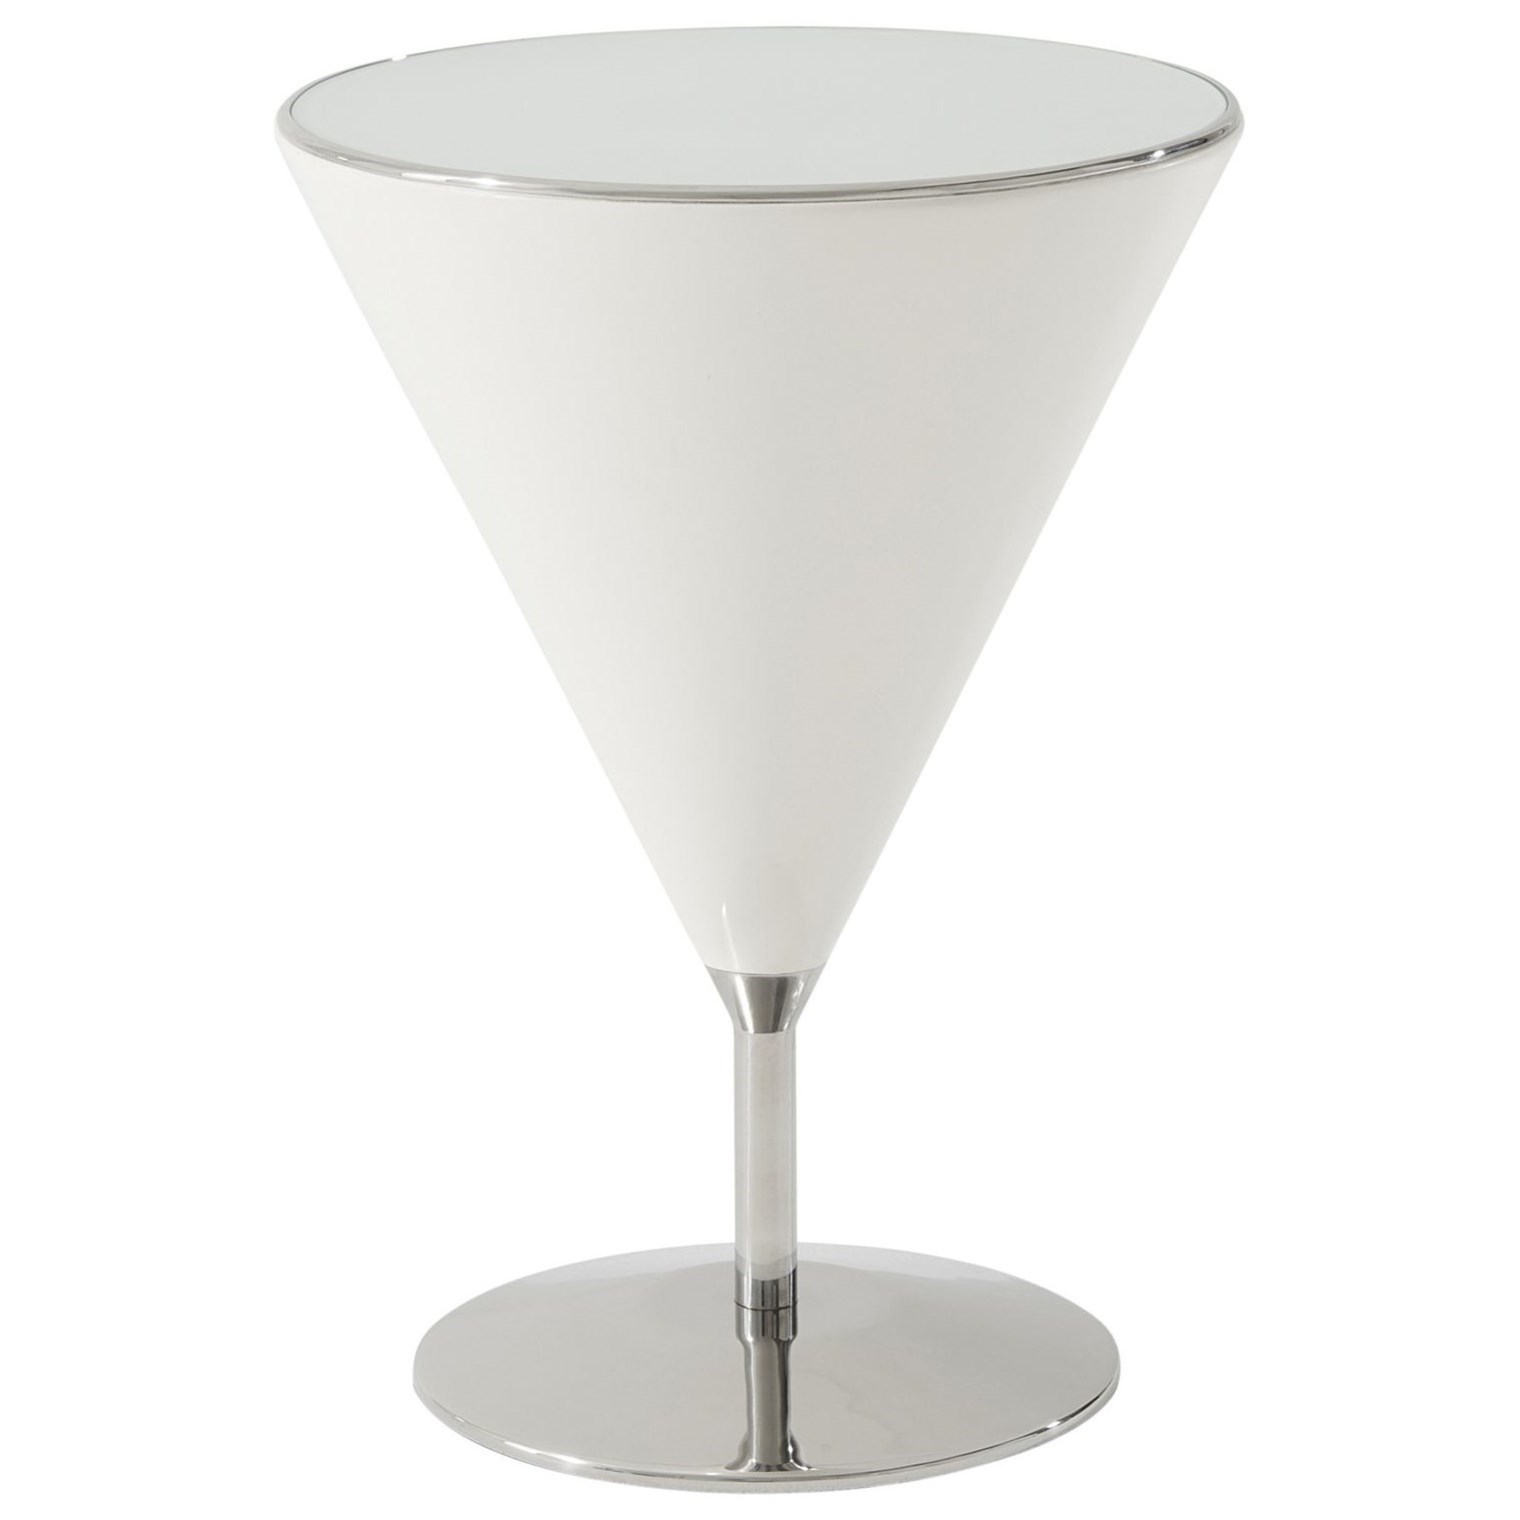 Mixology Accent Table with Quartz Finish and Stainless Steel Base